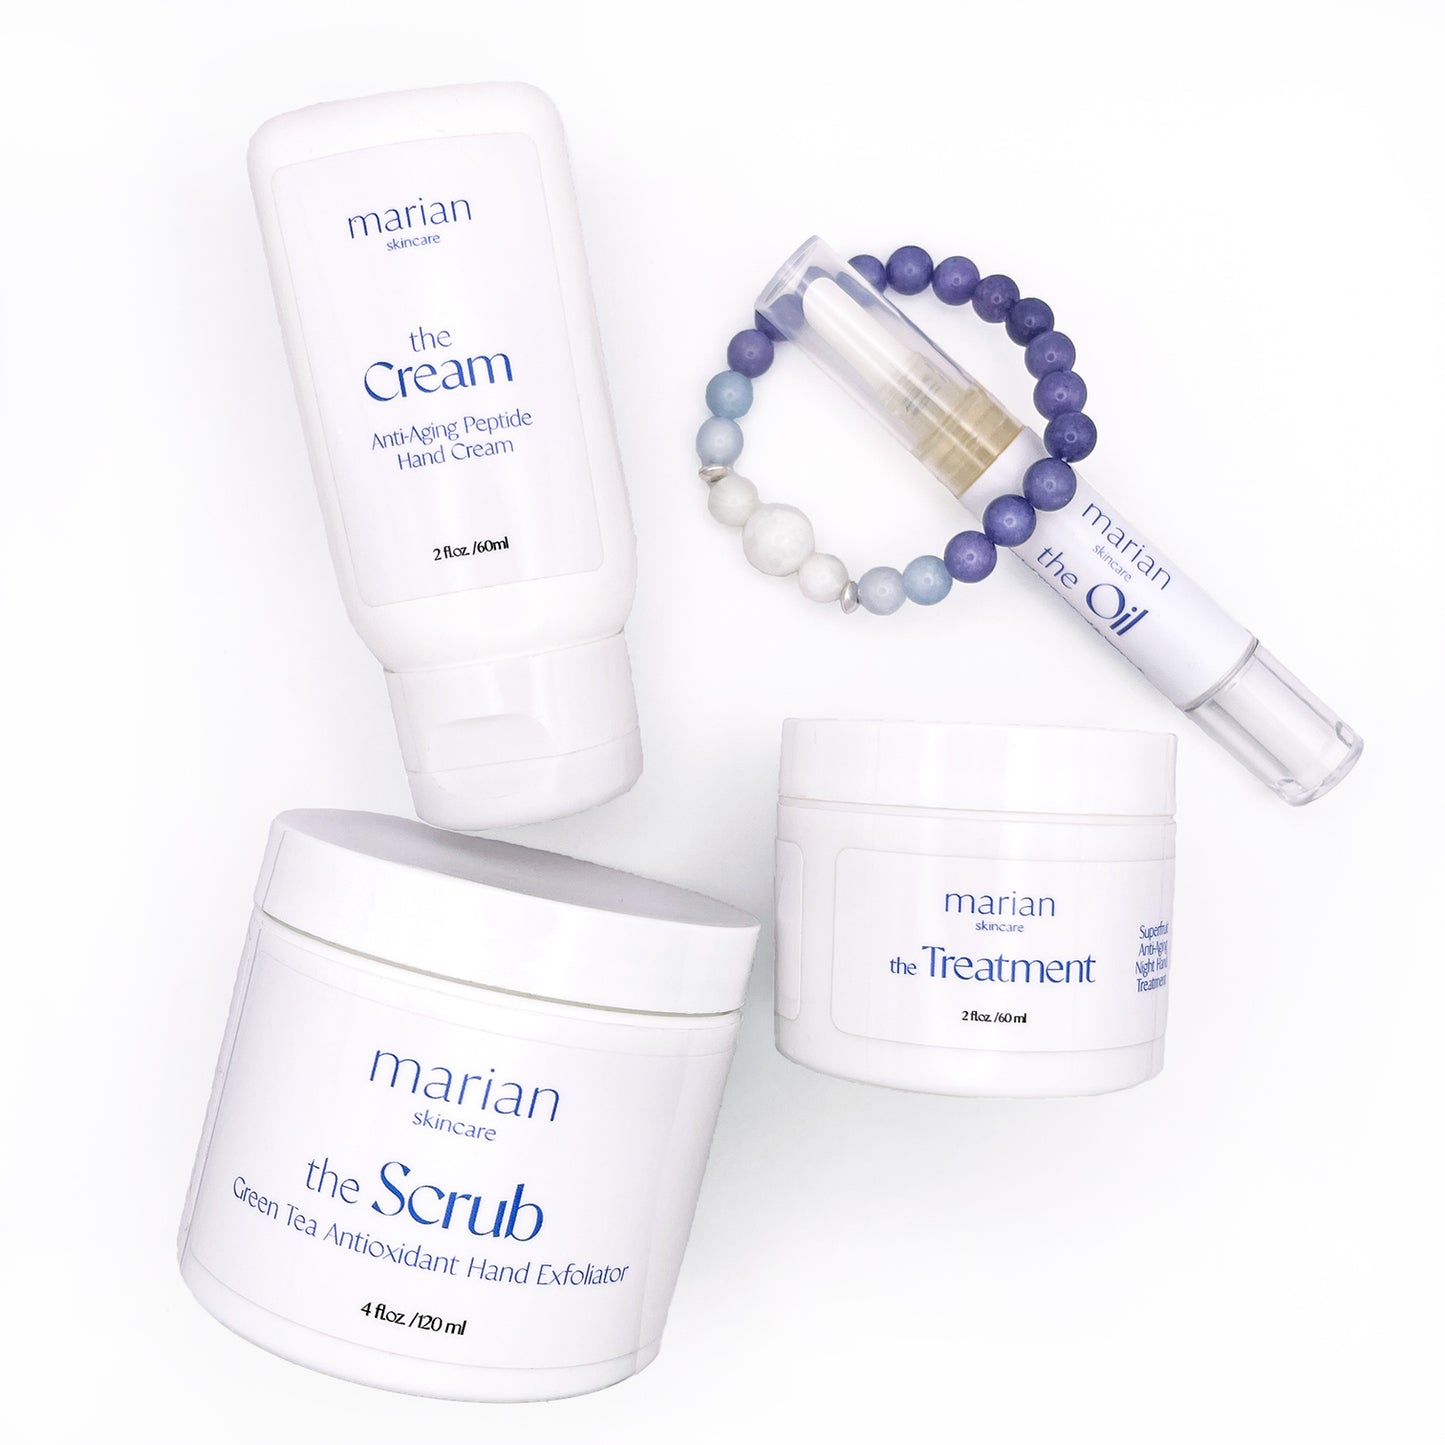 marian skincare holiday gift set includes the Cream, the Scrub, the Treatment, the Oil, and the Bracelet. Skincare for hands, hand cream, hand scrub, cuticle oil, crystal bead bracelet.